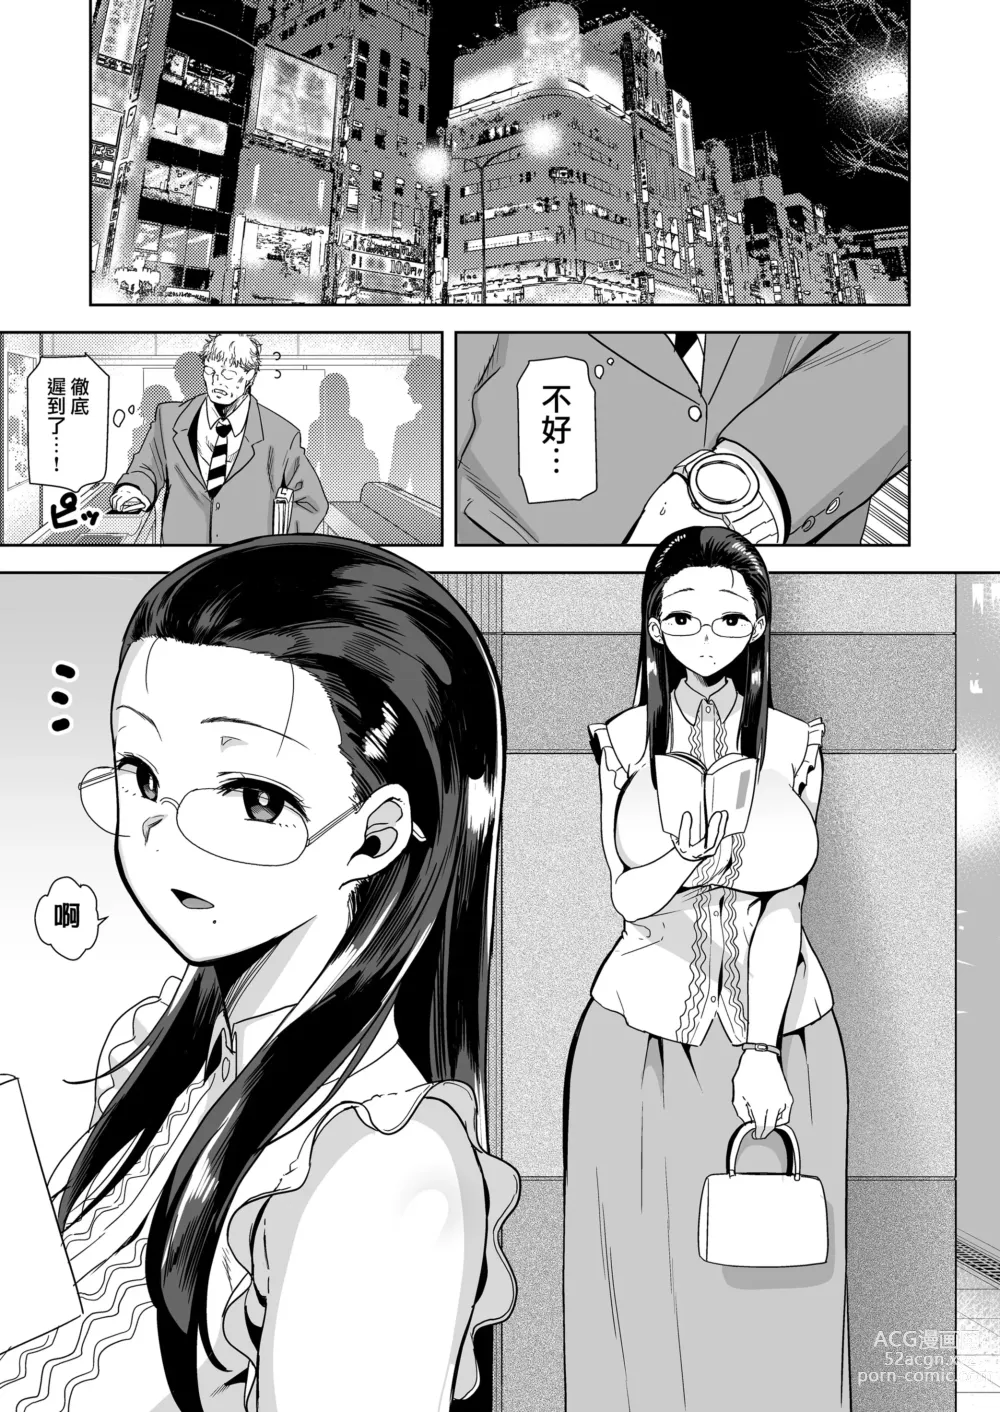 Page 4 of doujinshi 聖華女学院高等部公認竿おじさん1-6